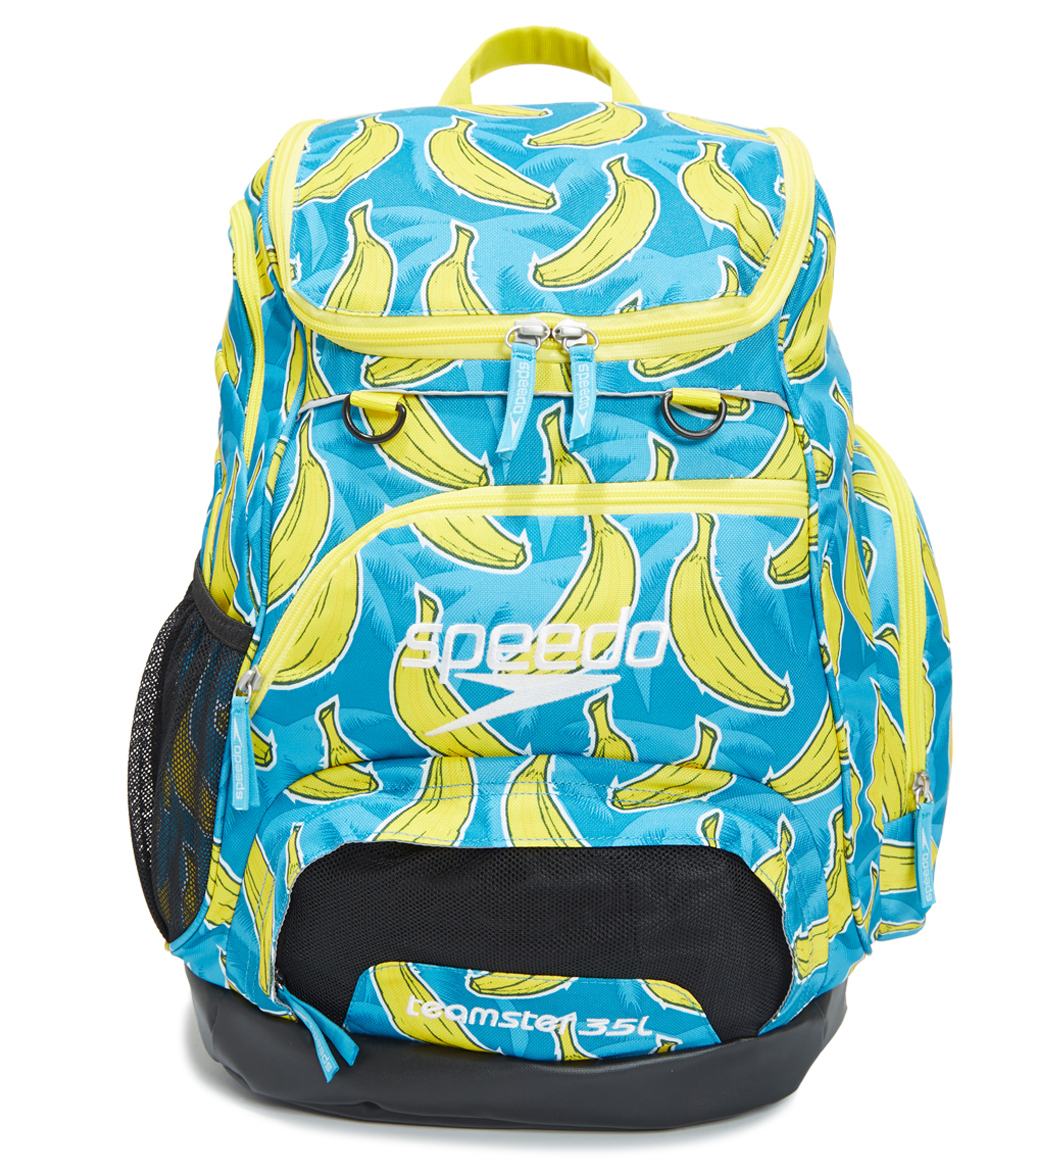 Speedo Printed Teamster 35L Backpack - Blue/Yellow - Swimoutlet.com